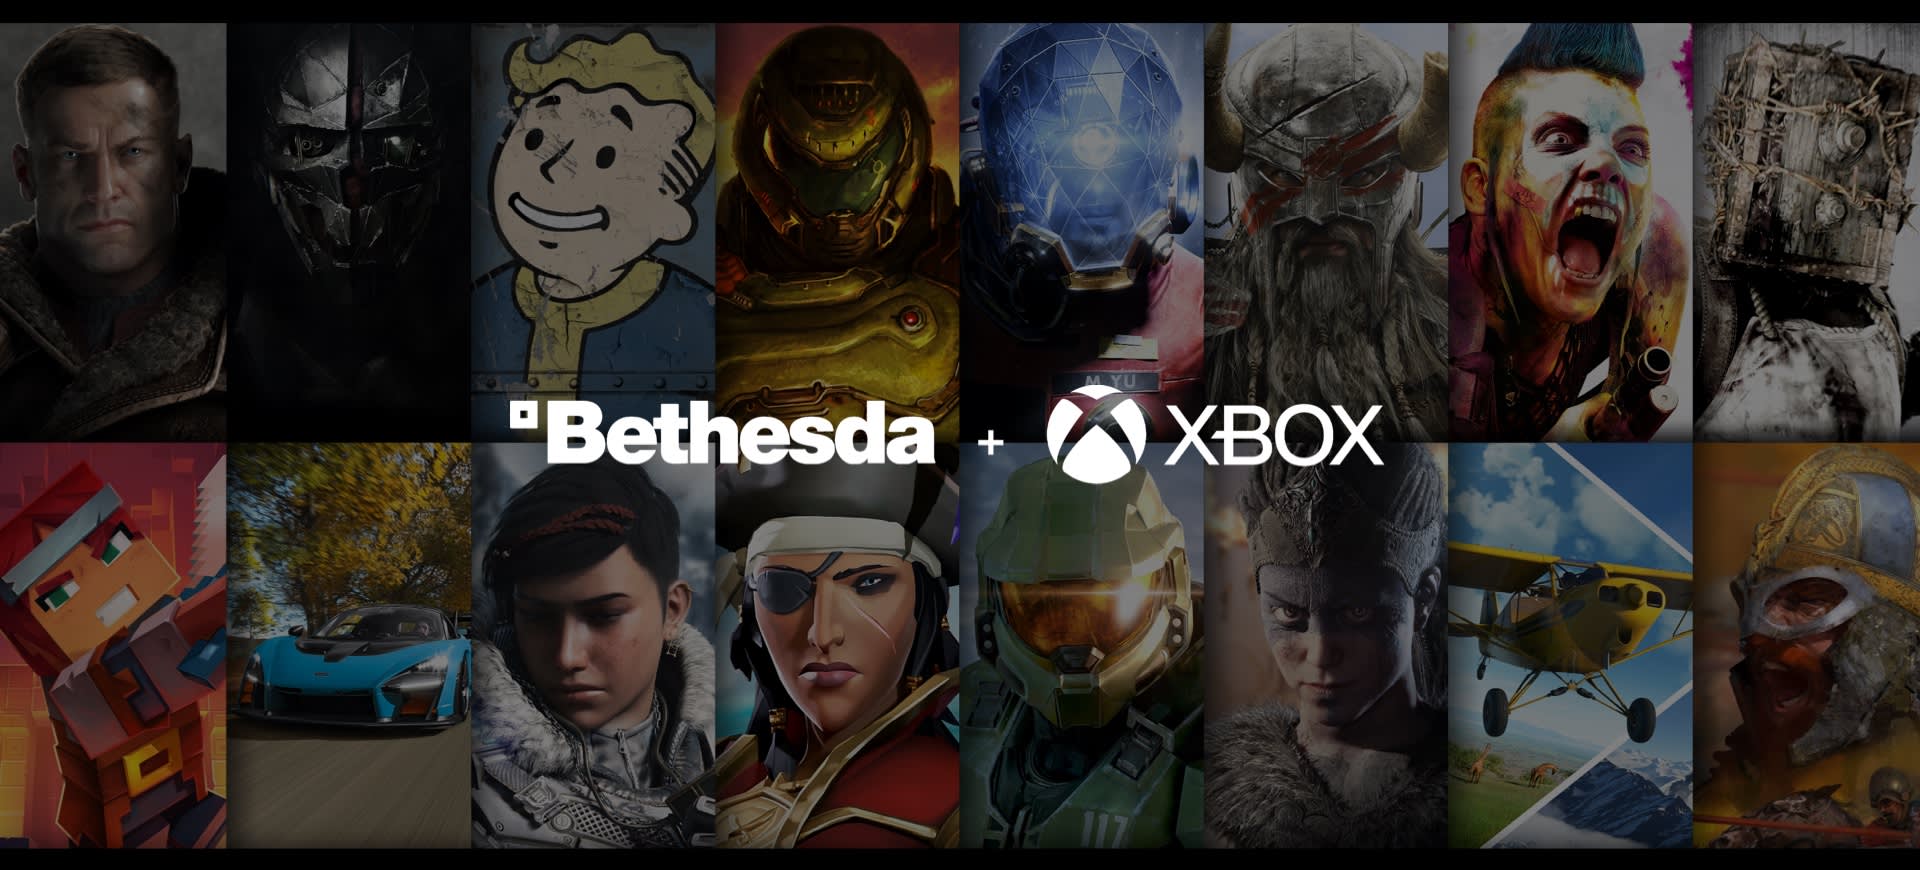 It’s Official! Bethesda Has Joined Xbox